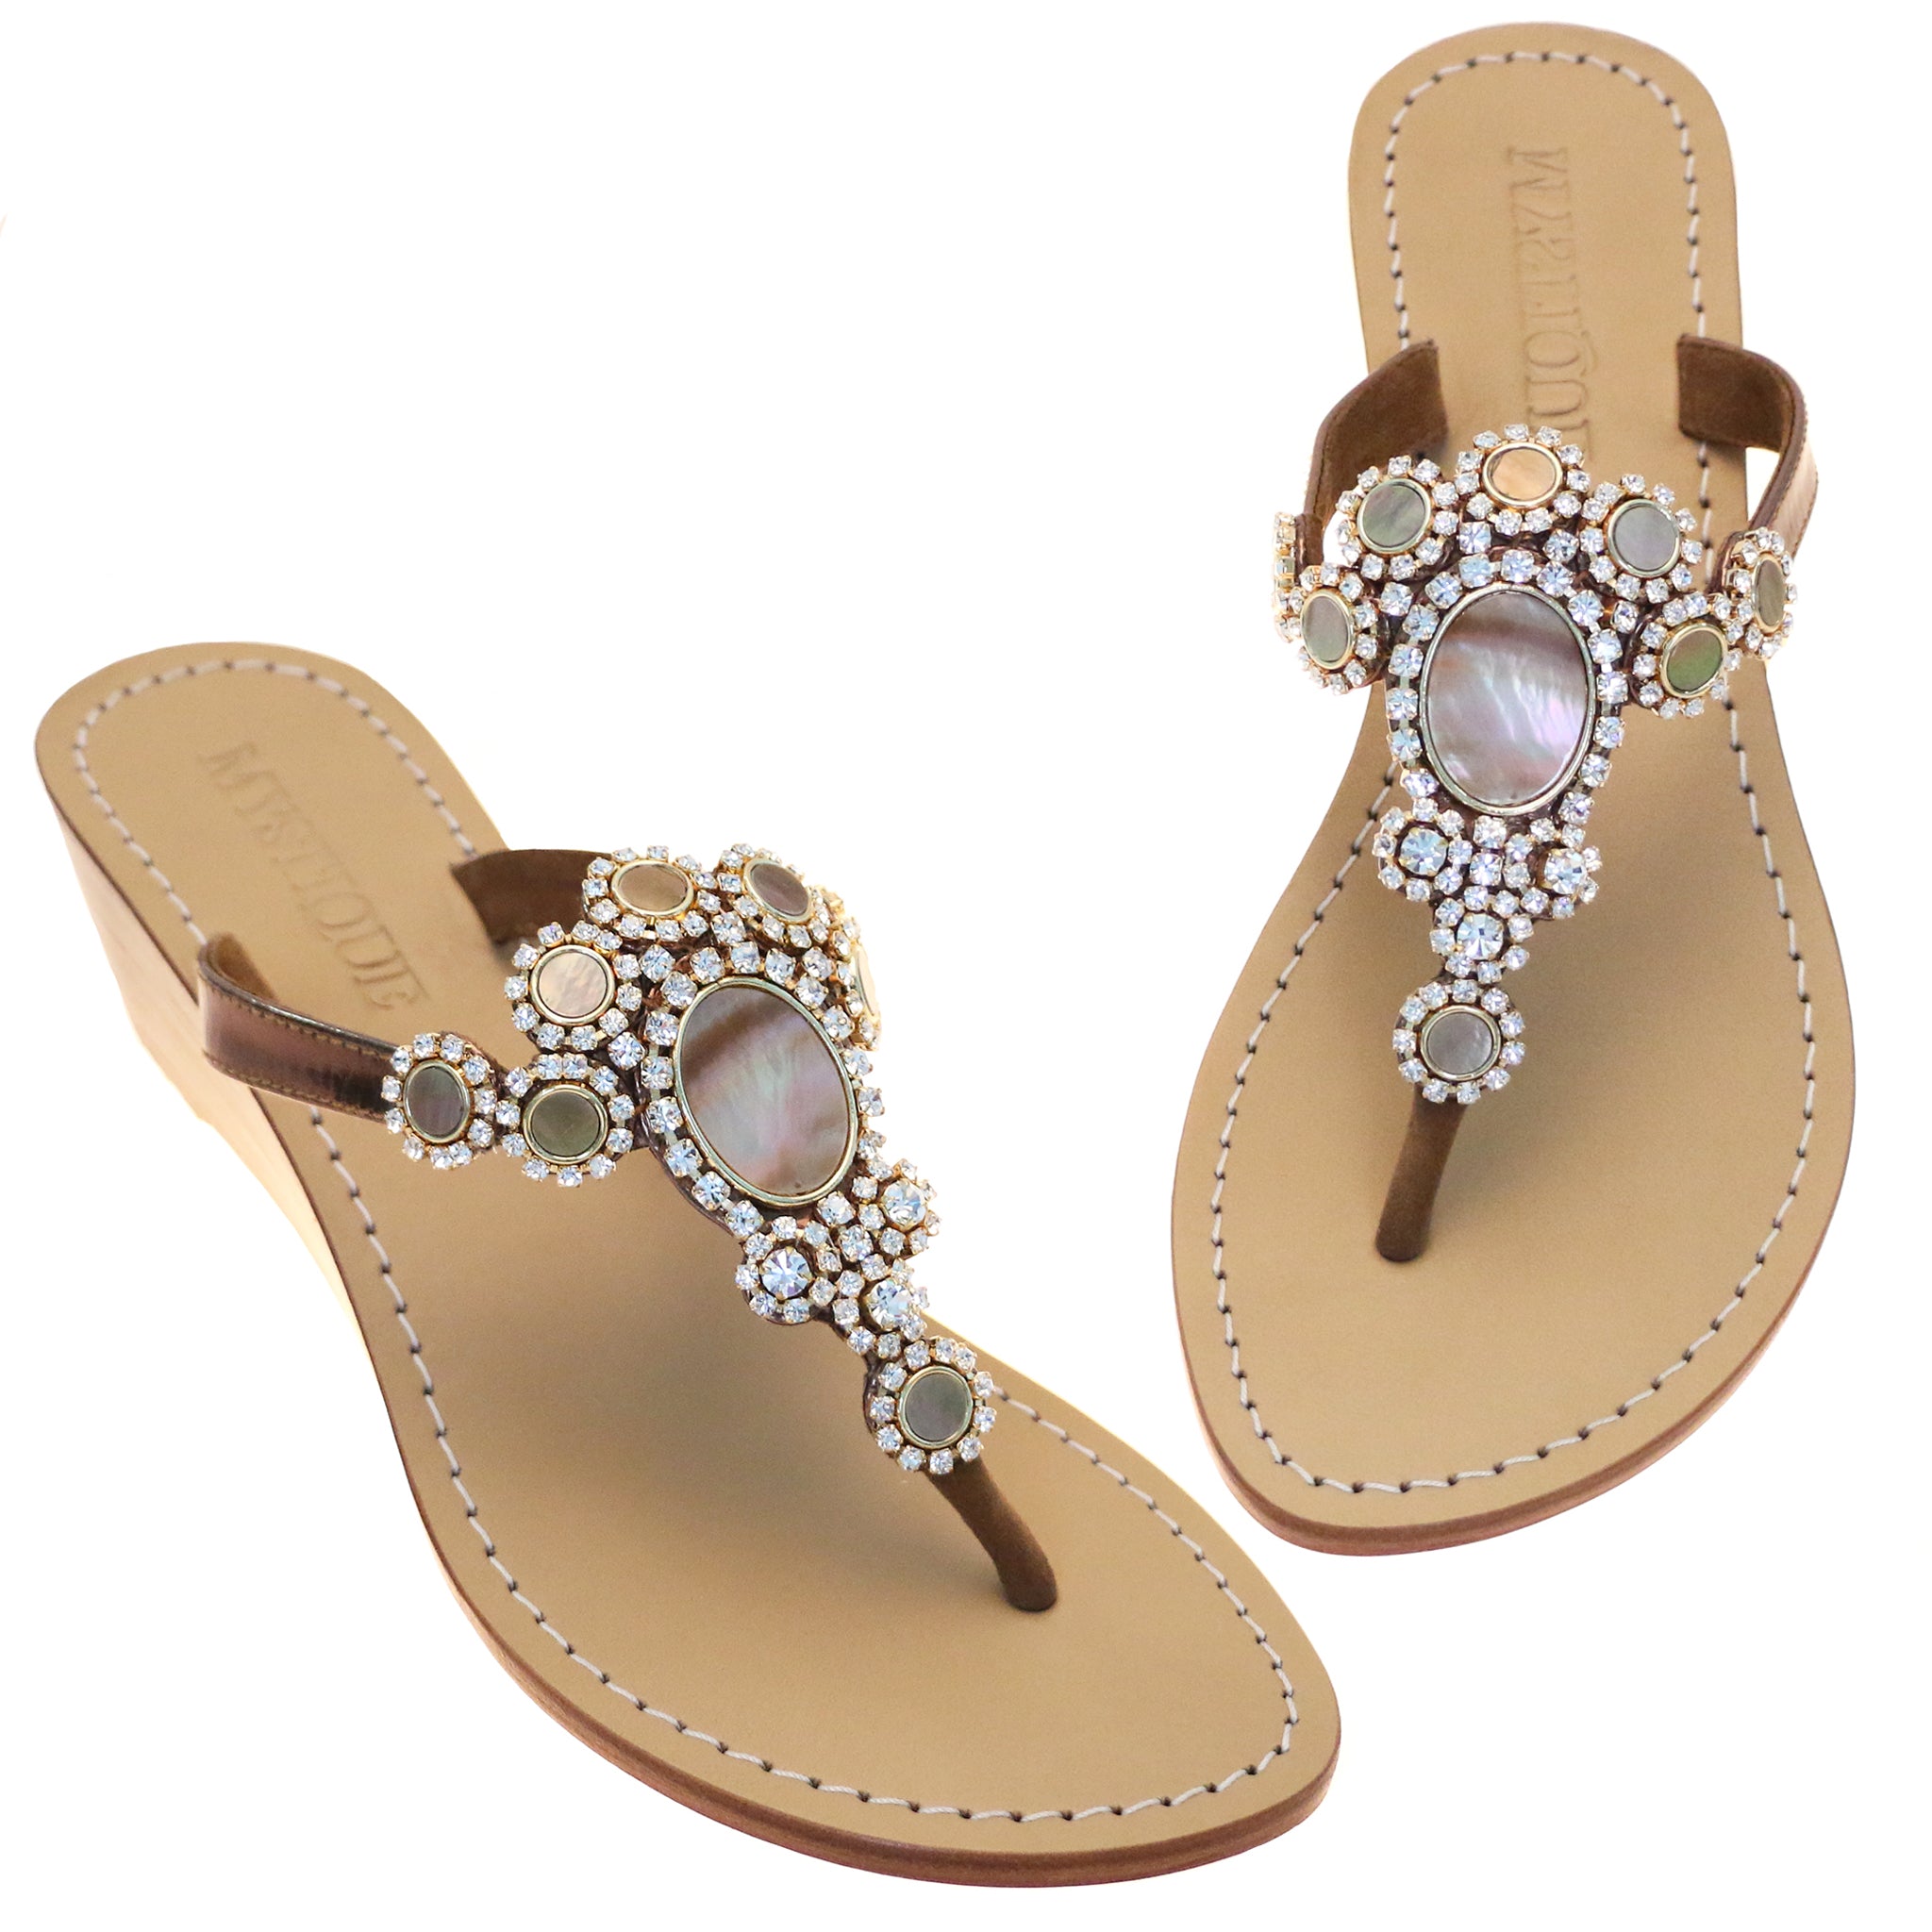 Lagos - Women's Natural Shell Jeweled Wedge Sandals - Mystique Sandals